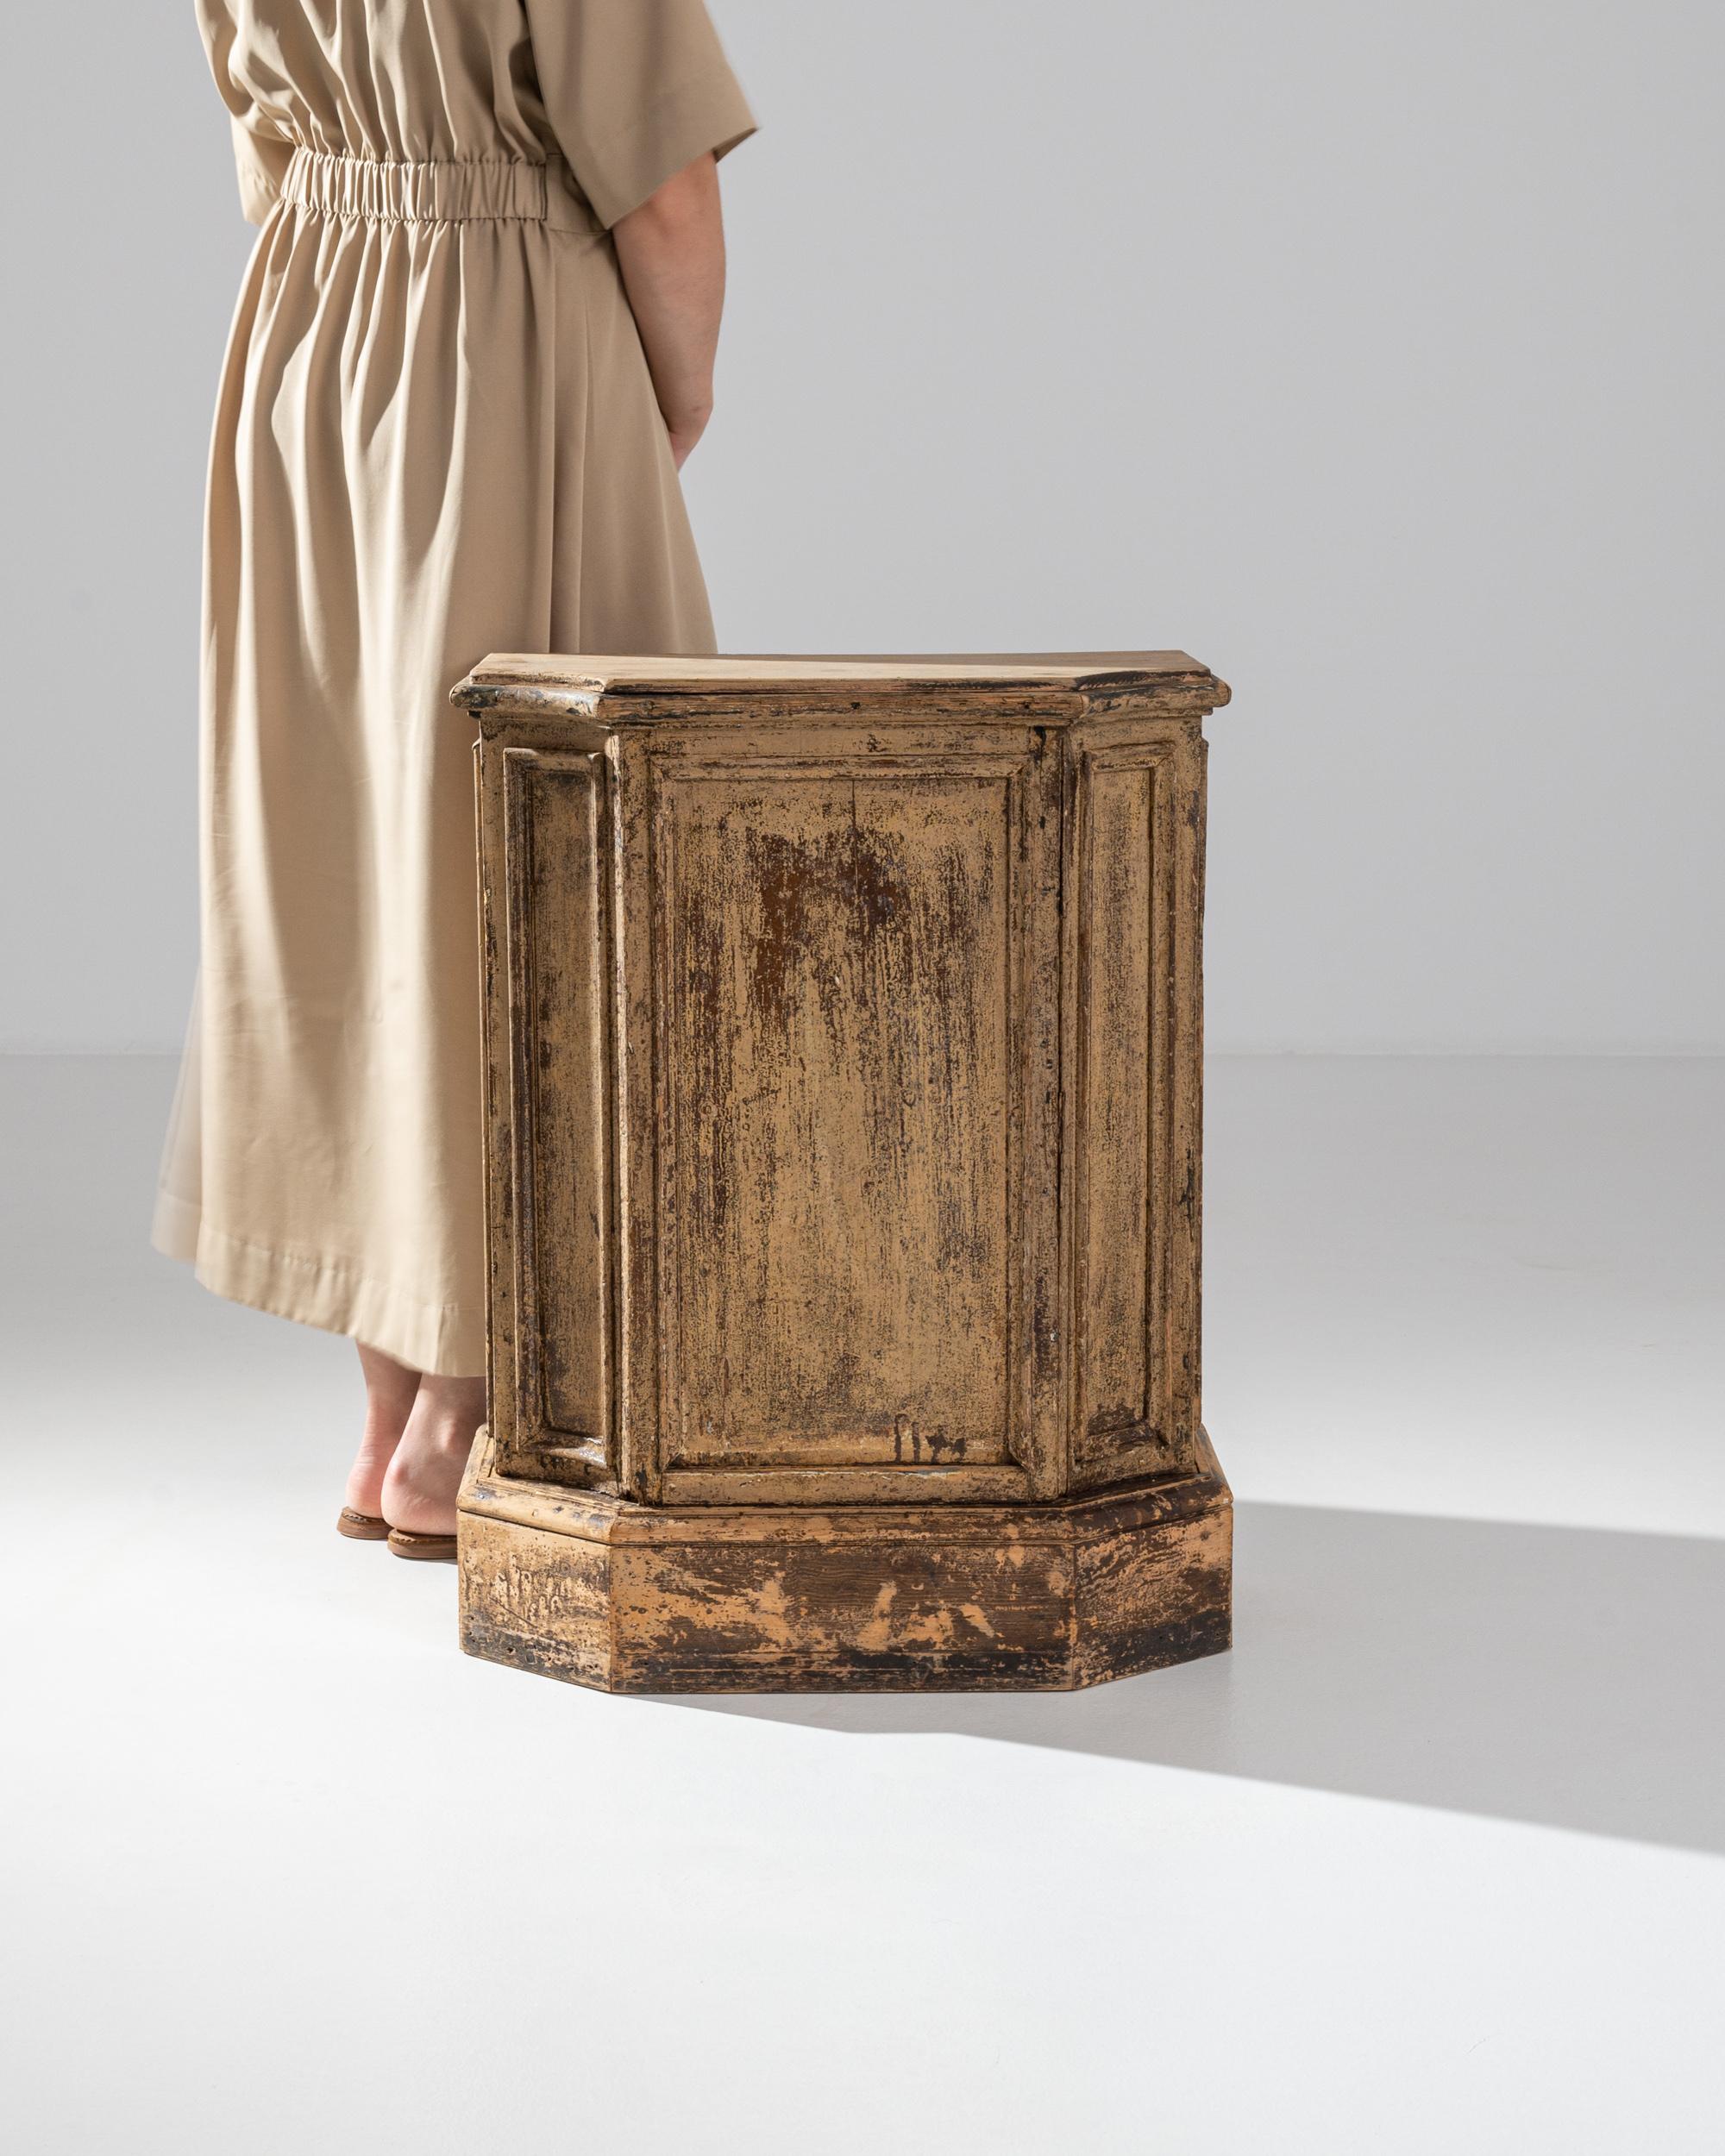 A wooden pedestal from 1800s France. Layers of caramel and warm brown across the pedestal’s surface have been revealed by time. Its trapezoidal shape gives the 27 inch tall plinth a projecting stance, ideal for display.